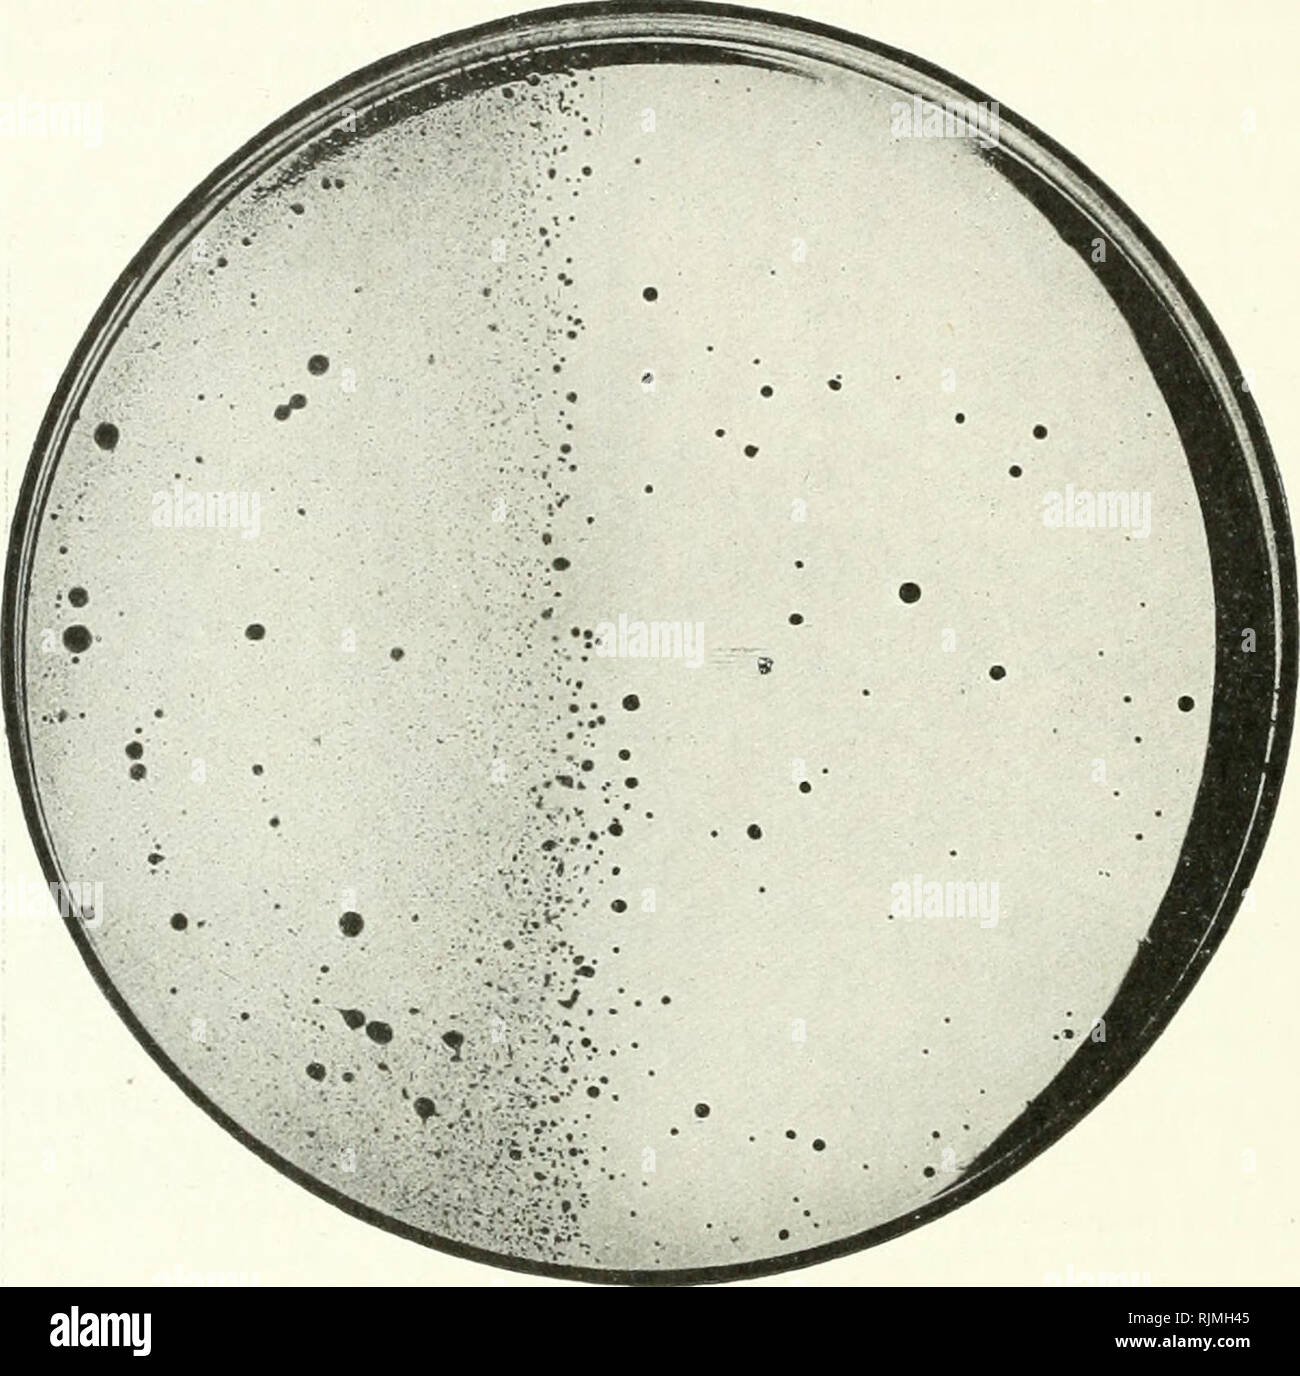 . Bacteria in relation to plant diseases. Bacteria; Plant diseases. 66 BACTERIA IN RELATION TO PLANT DISEASES. rod and 14 plates poured at 410 to 380 C, after inoculating very copiously—six 3 mm. loops in one instance. In other canes it was found alive at the end of a year. Tubes of bouillon inoculated November 9, 1903, and kept at room-temperatures were still cloudy on March 17 (129 days),but a transfer from one of them did not cloud bouillon. In beef-agar stabs kept in the refrigerator at io° to i5°C.the cultures were alive at the end of 7 months 10 days. Under similar conditions another cul Stock Photo